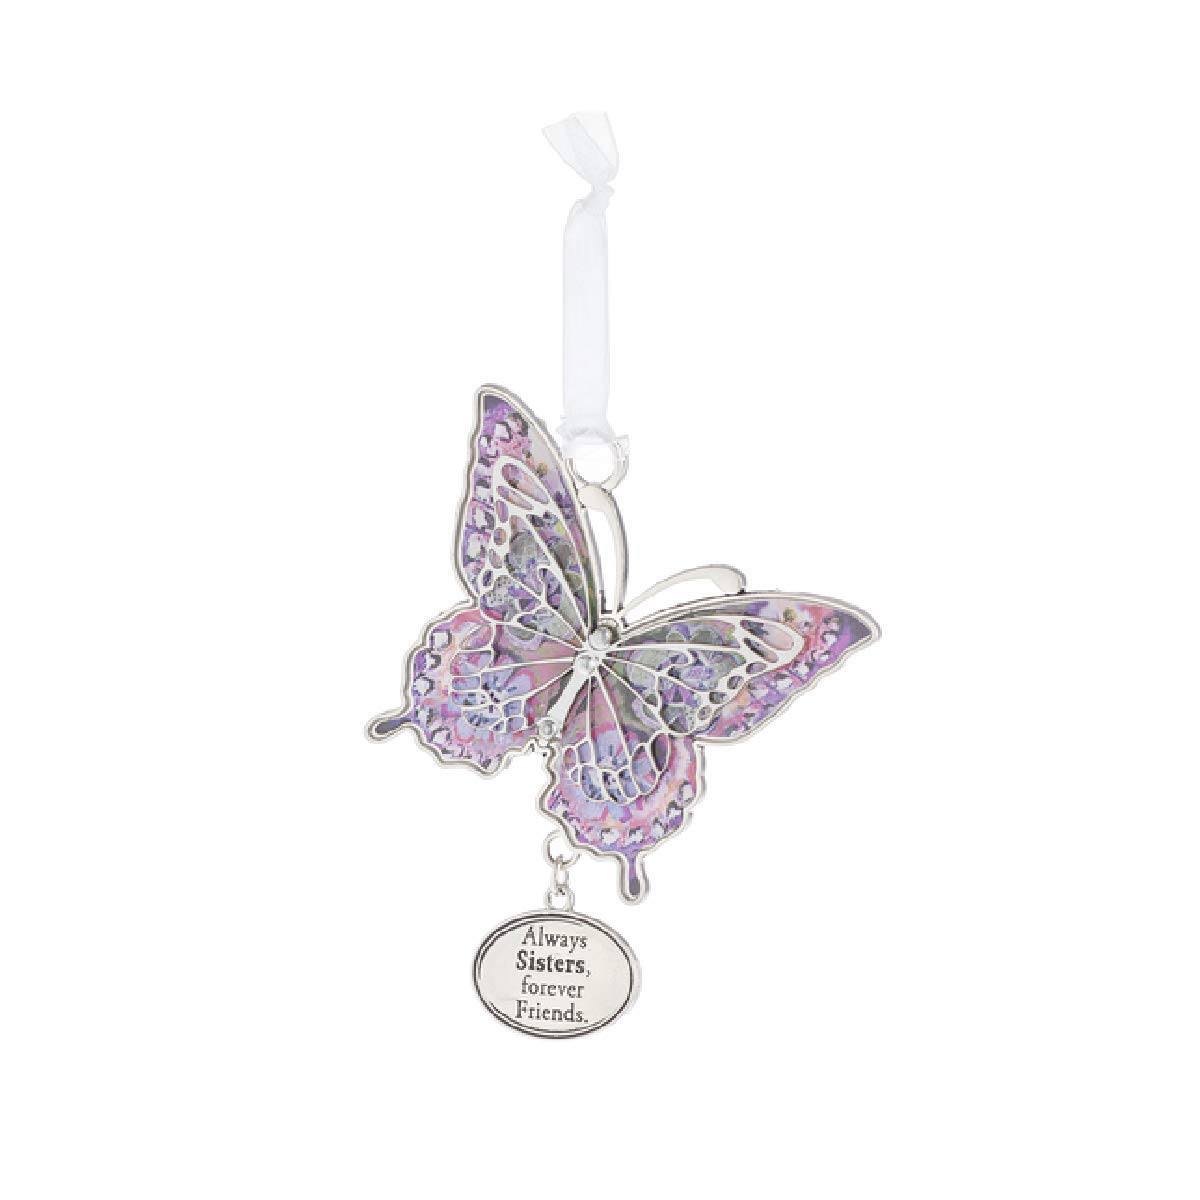 Ganz Hearts A Flutter Ornament - Always Sisters, Forever Friends